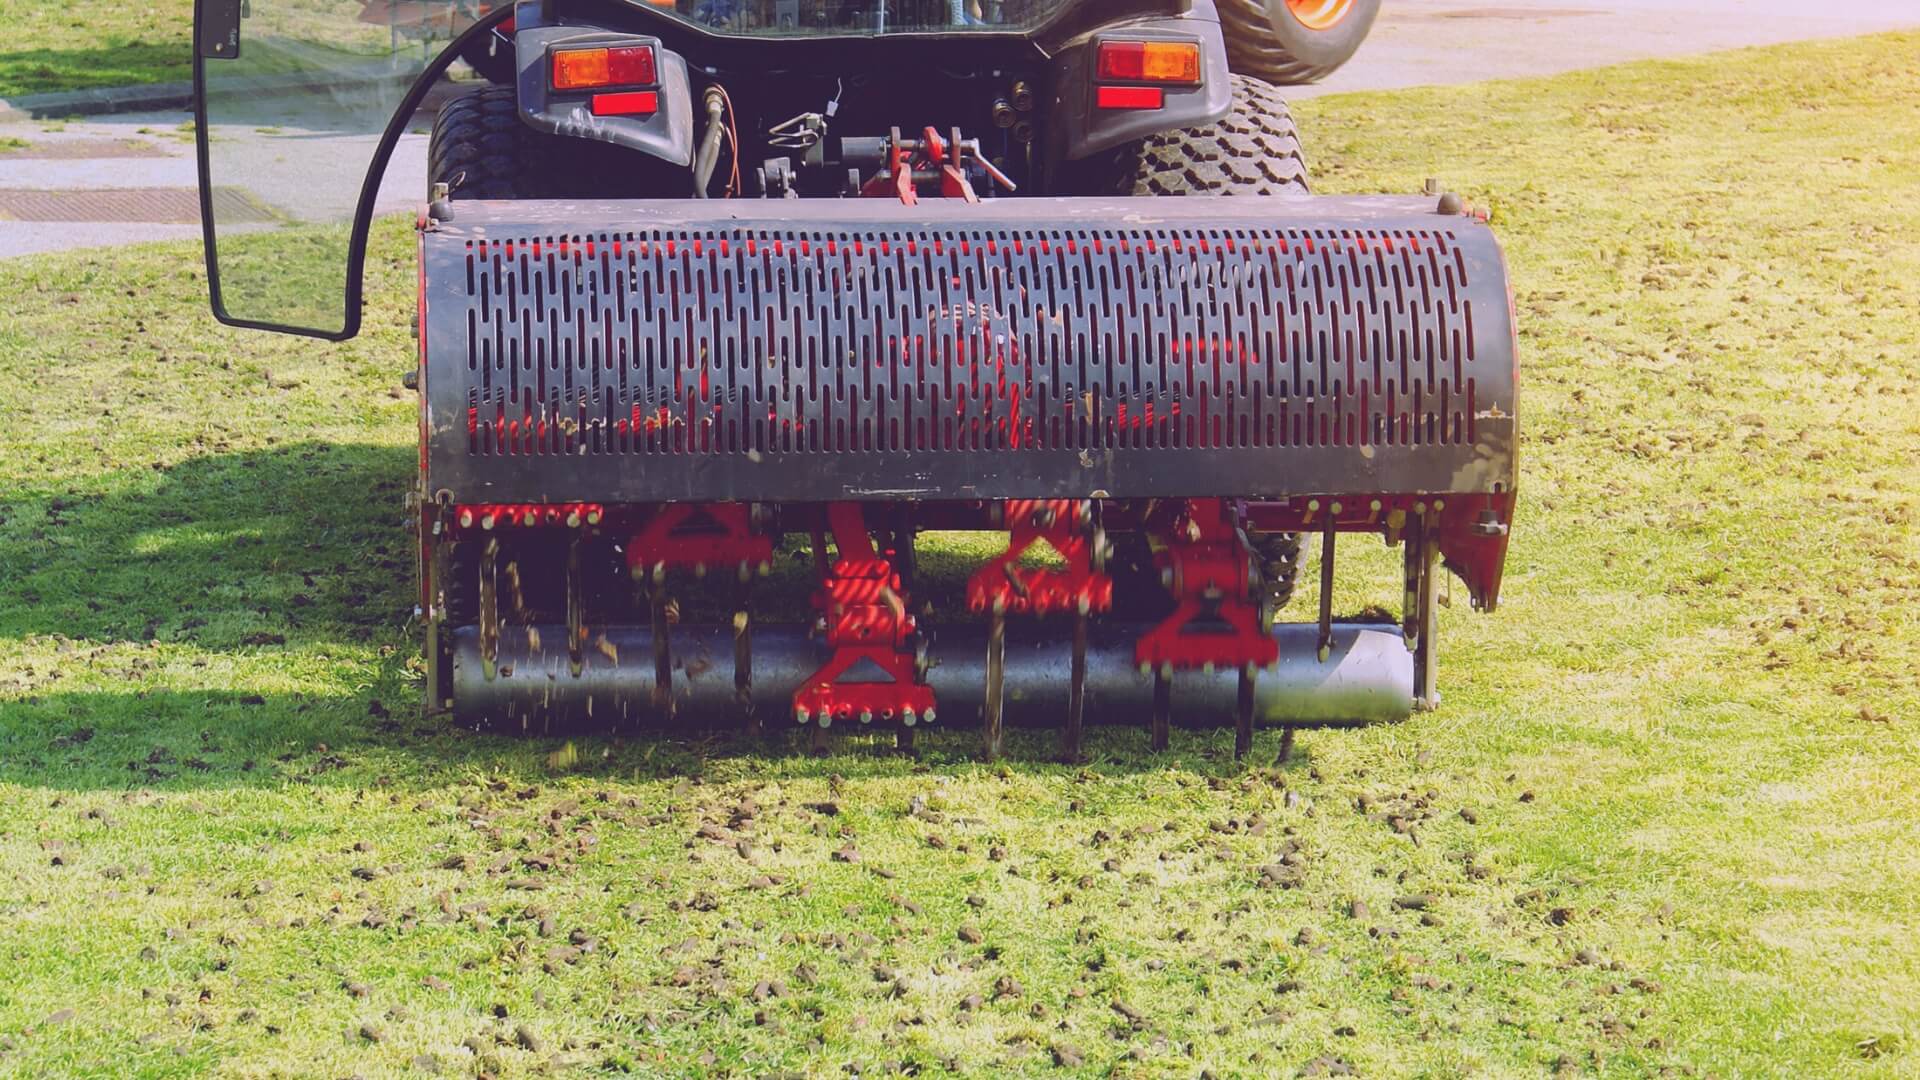 aerating-machine-for-lawn-aeration-services-in-nampa-idaho